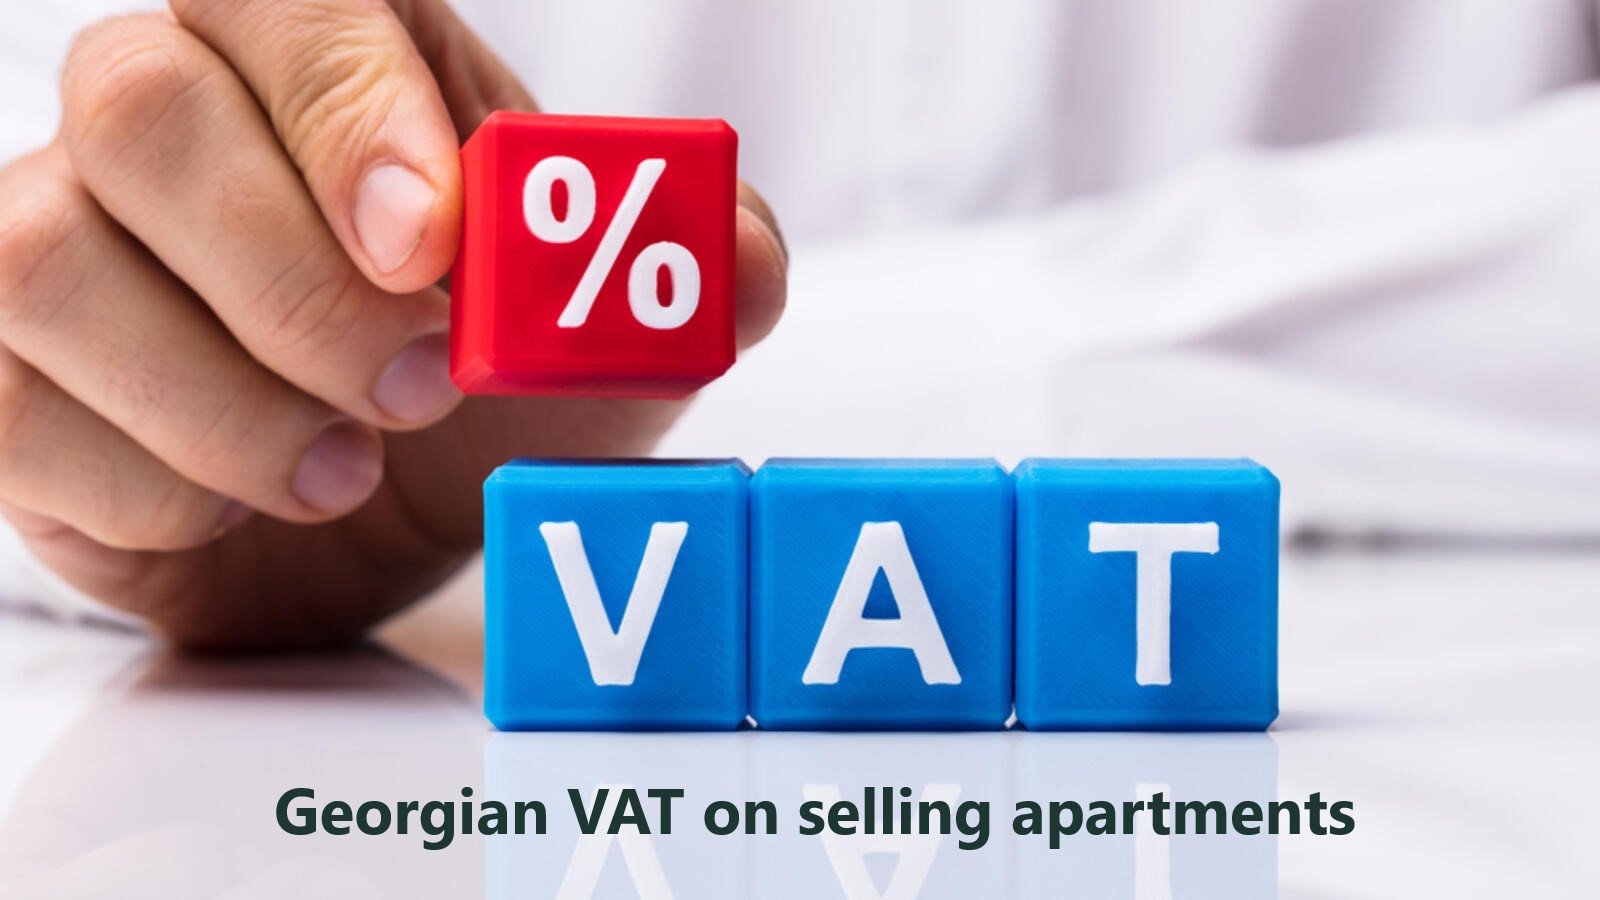 Amendment of the Tax Law of Georgia, according to which selling 4 apartments by individuals is not explicitly exempted from VAT anymore